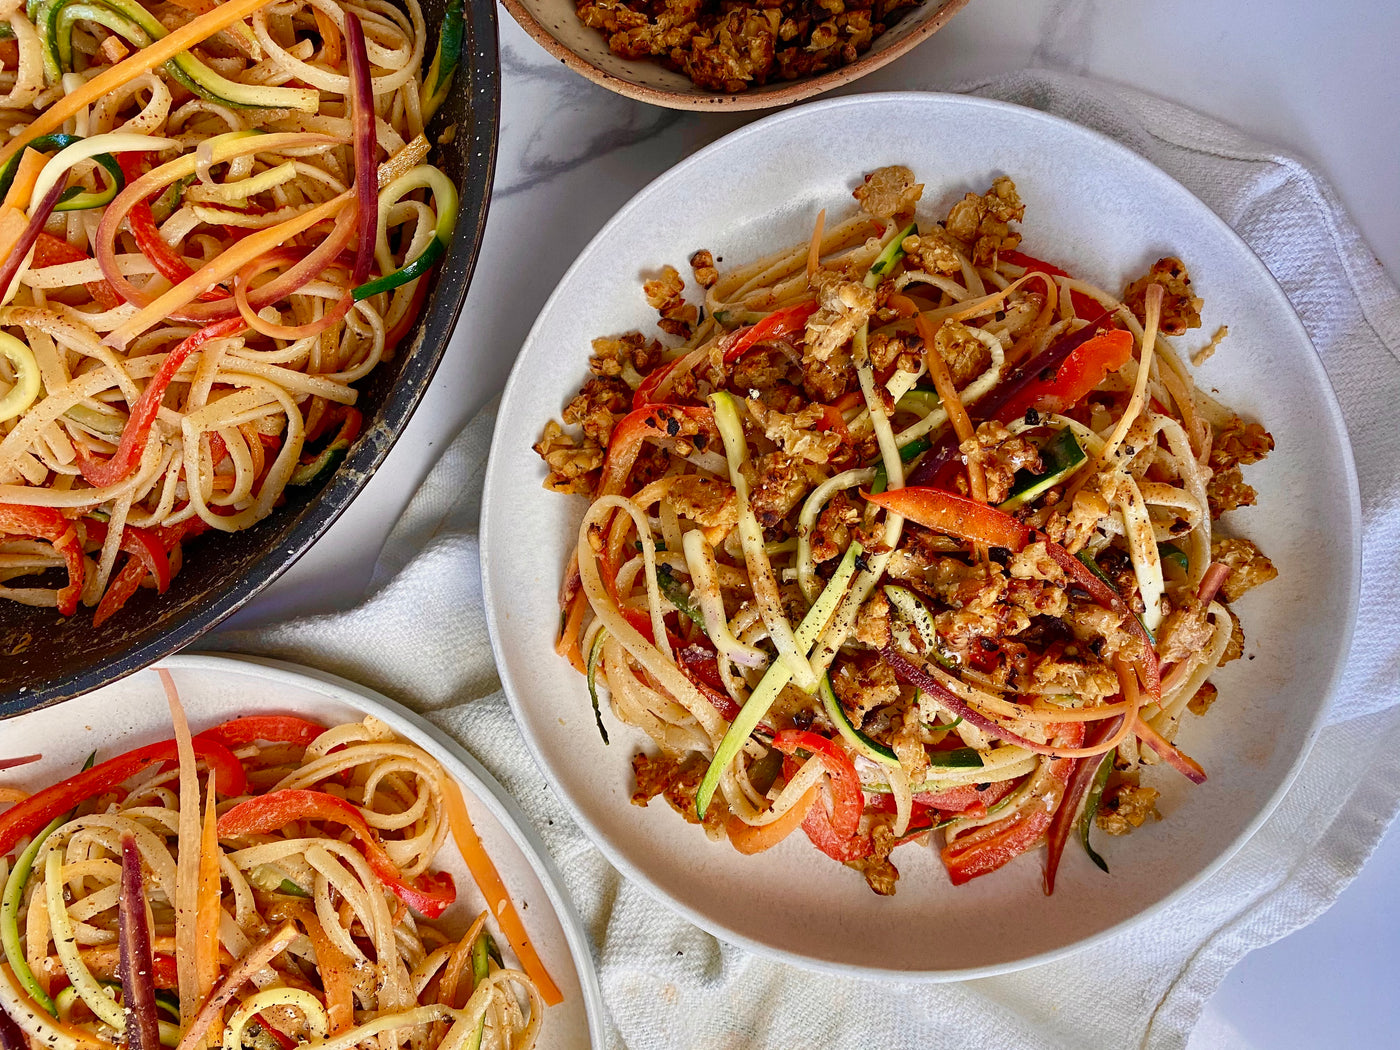 Spicy Almond Butter Rainbow Noodles with Tempeh Crumbles